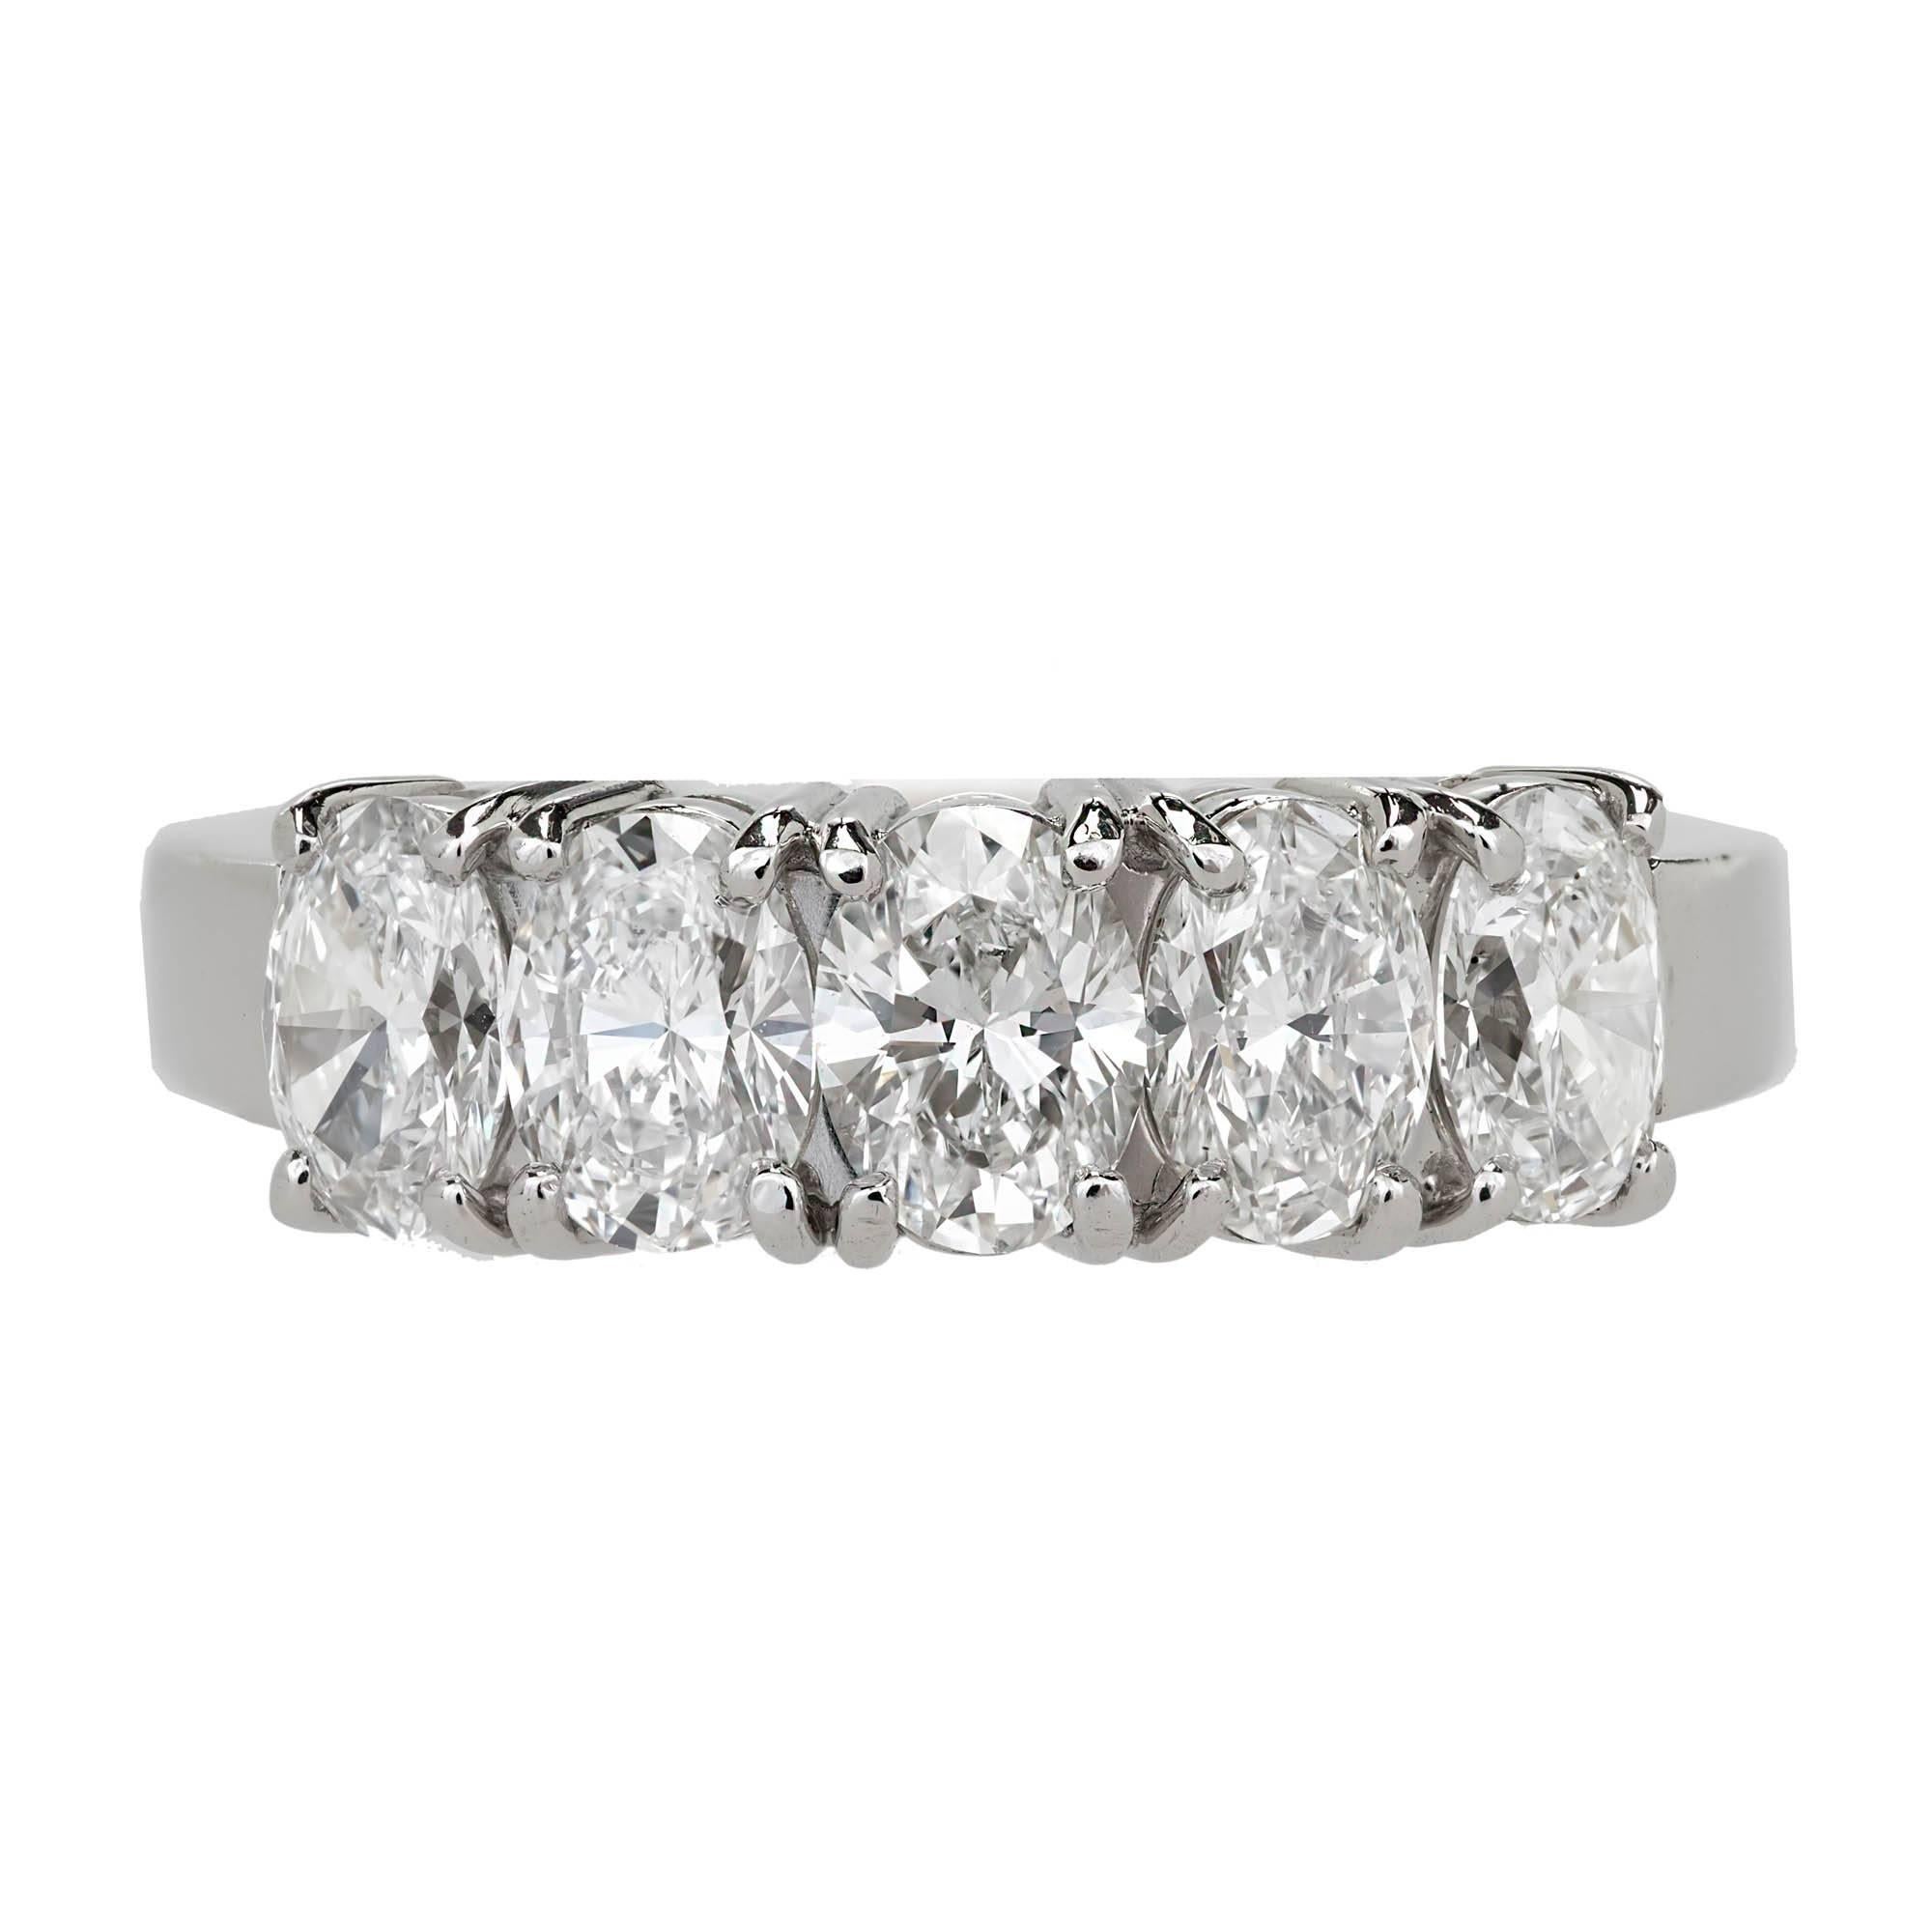 Peter Suchy Ideal cut oval five Diamond band wedding ring. Made in a simple low to the hand platinum setting, with bright sparkly oval Diamonds. 

5 oval Diamonds, approx. total weight 2.00cts, F, VS1 – VS2
Size 6 and sizable
950 Platinum
Tested: